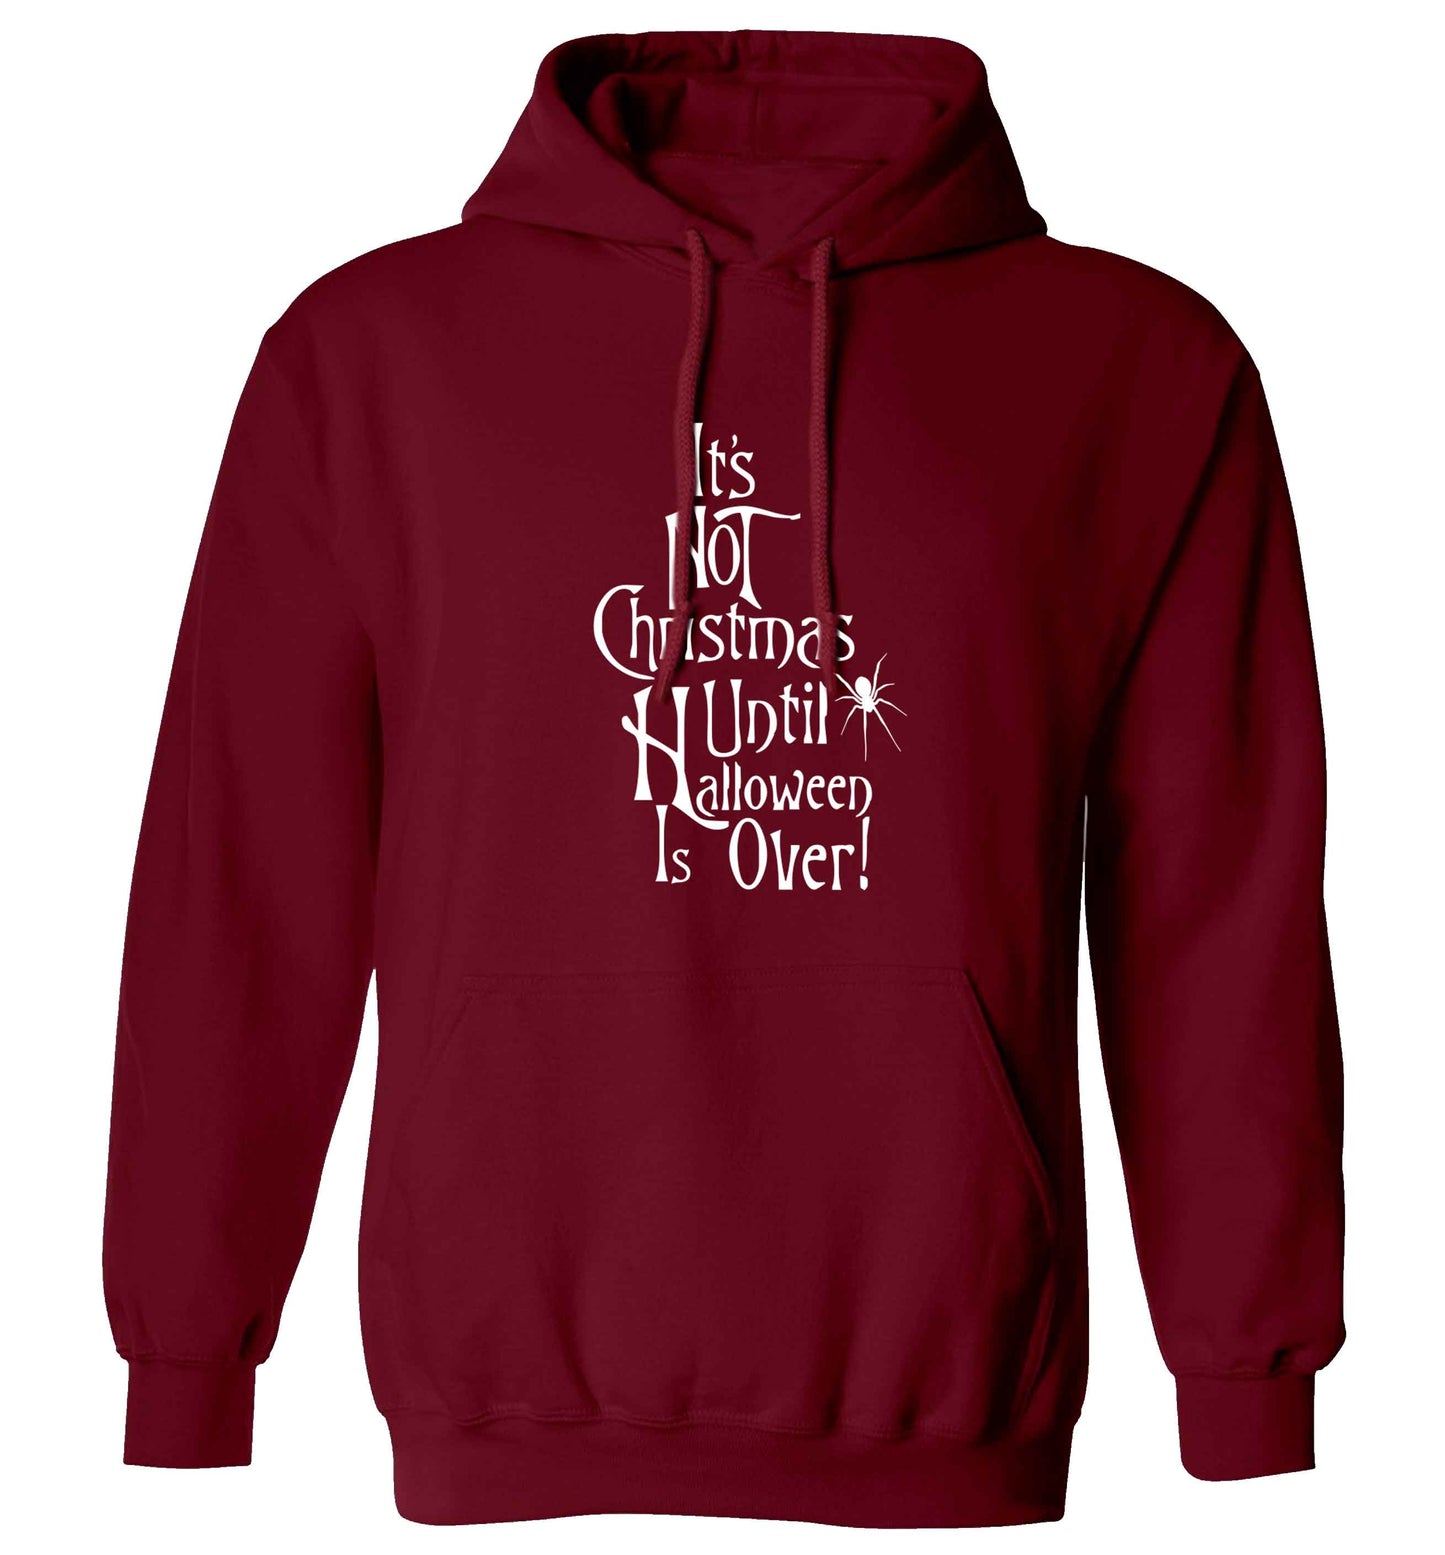 It's not Christmas until Halloween is over adults unisex maroon hoodie 2XL